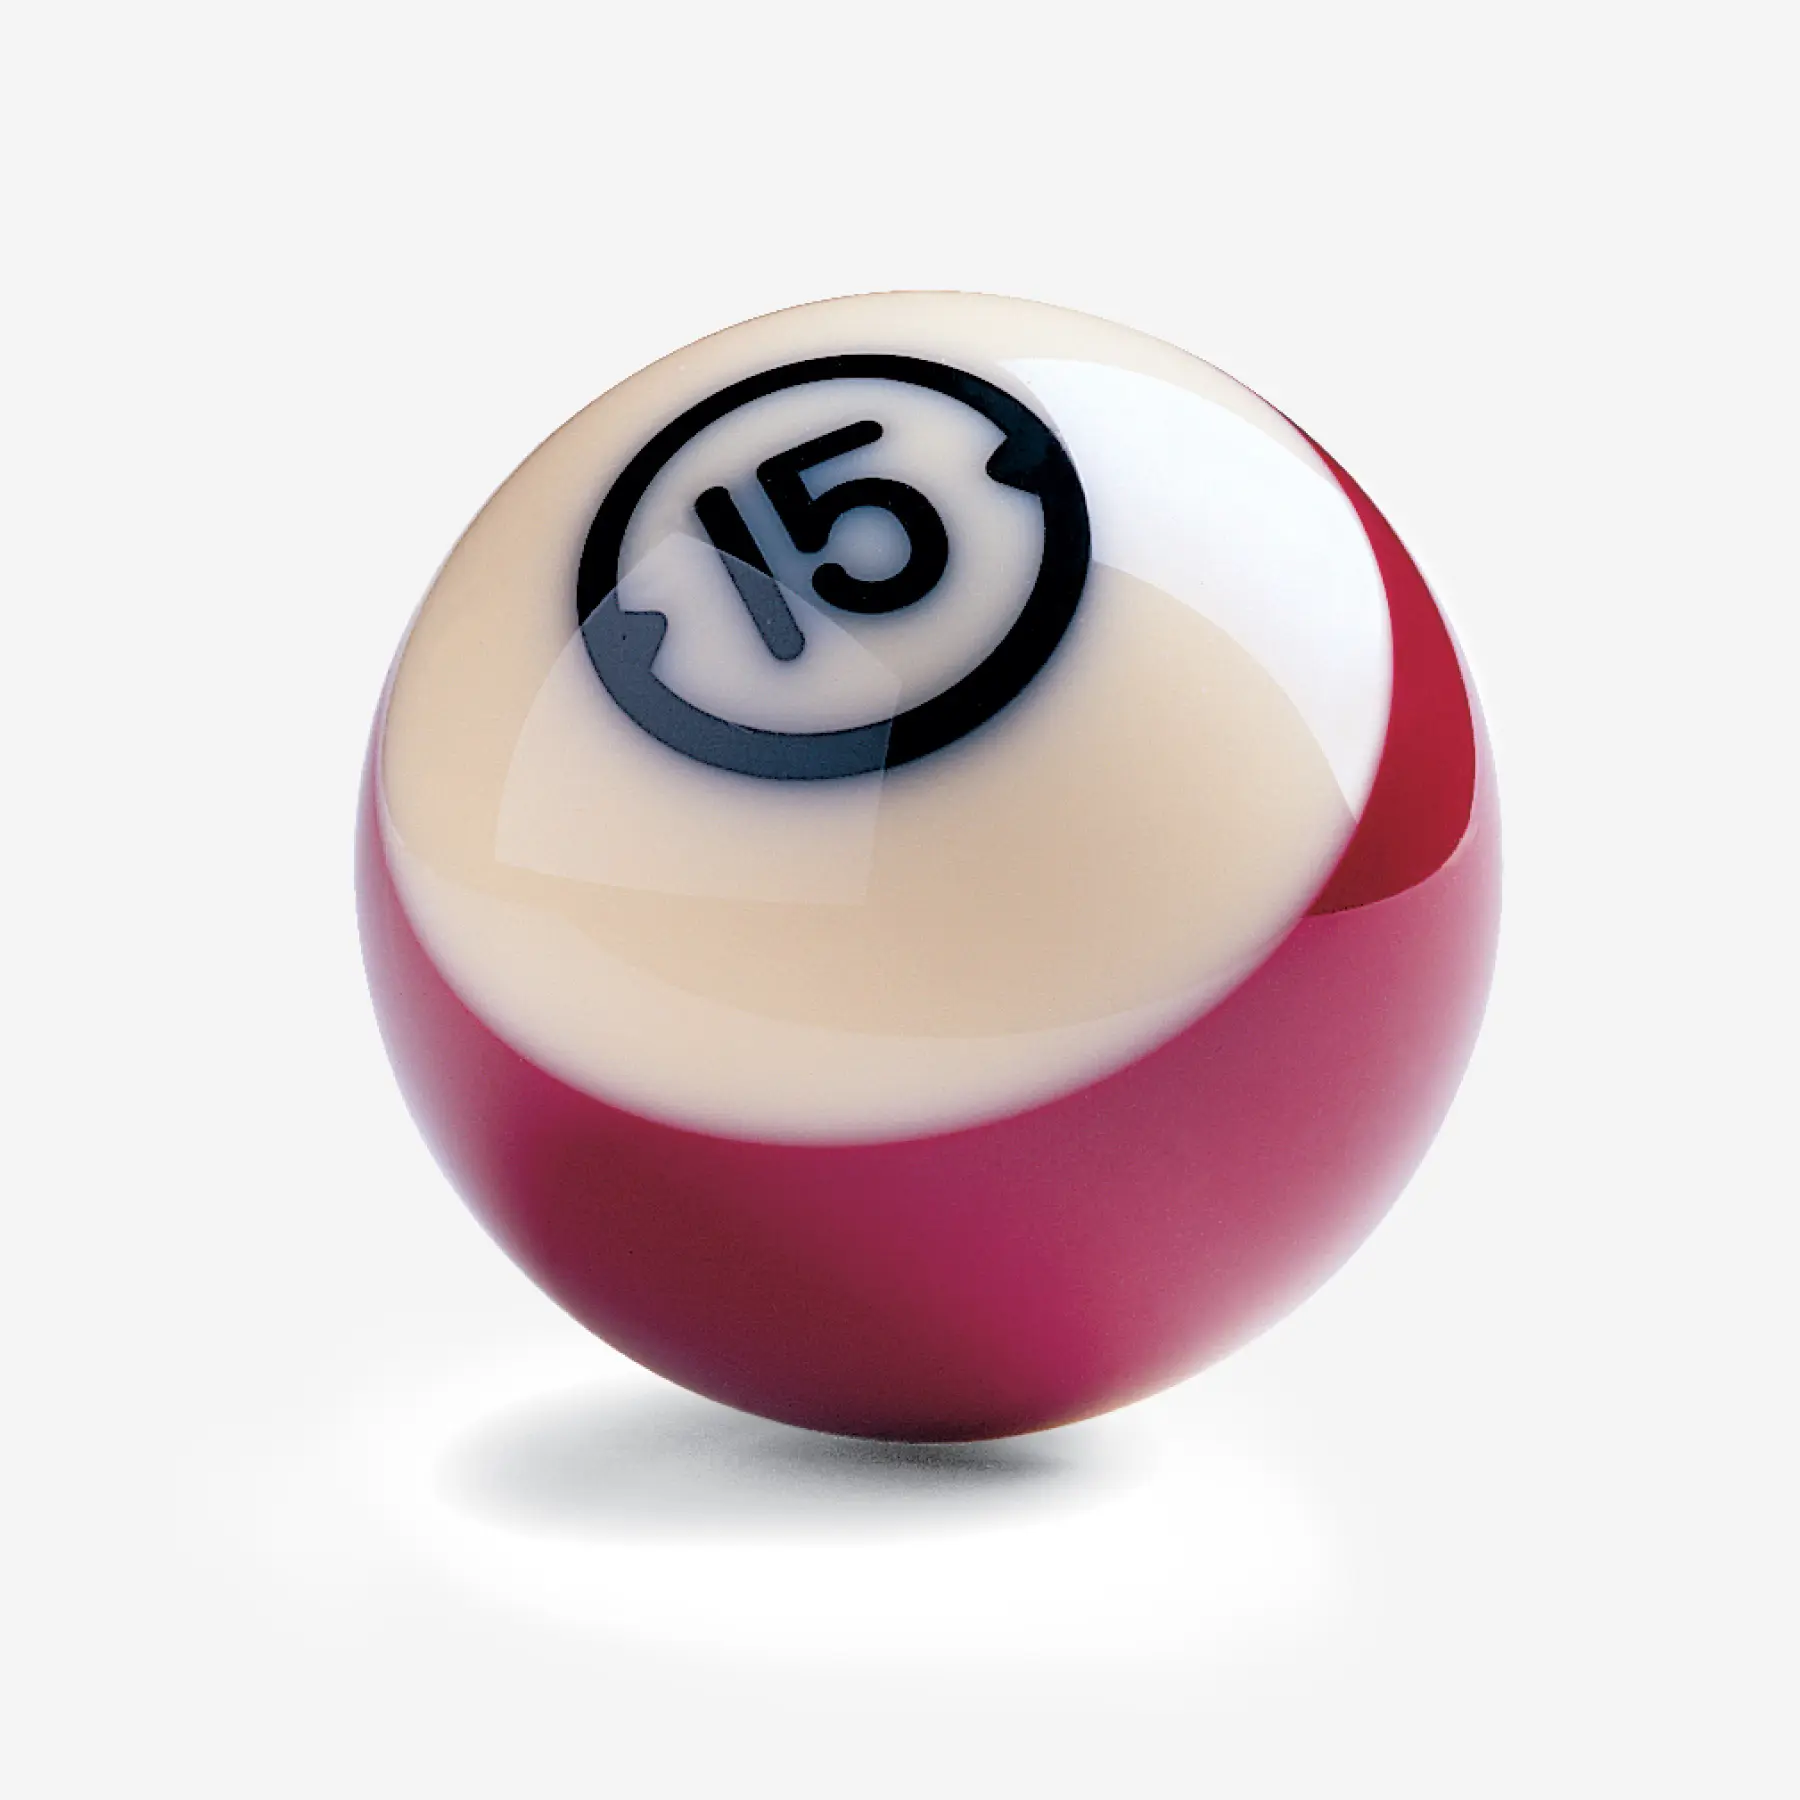 A number 15 pool ball represents our integrated marketing work with Brunswick Billiards.